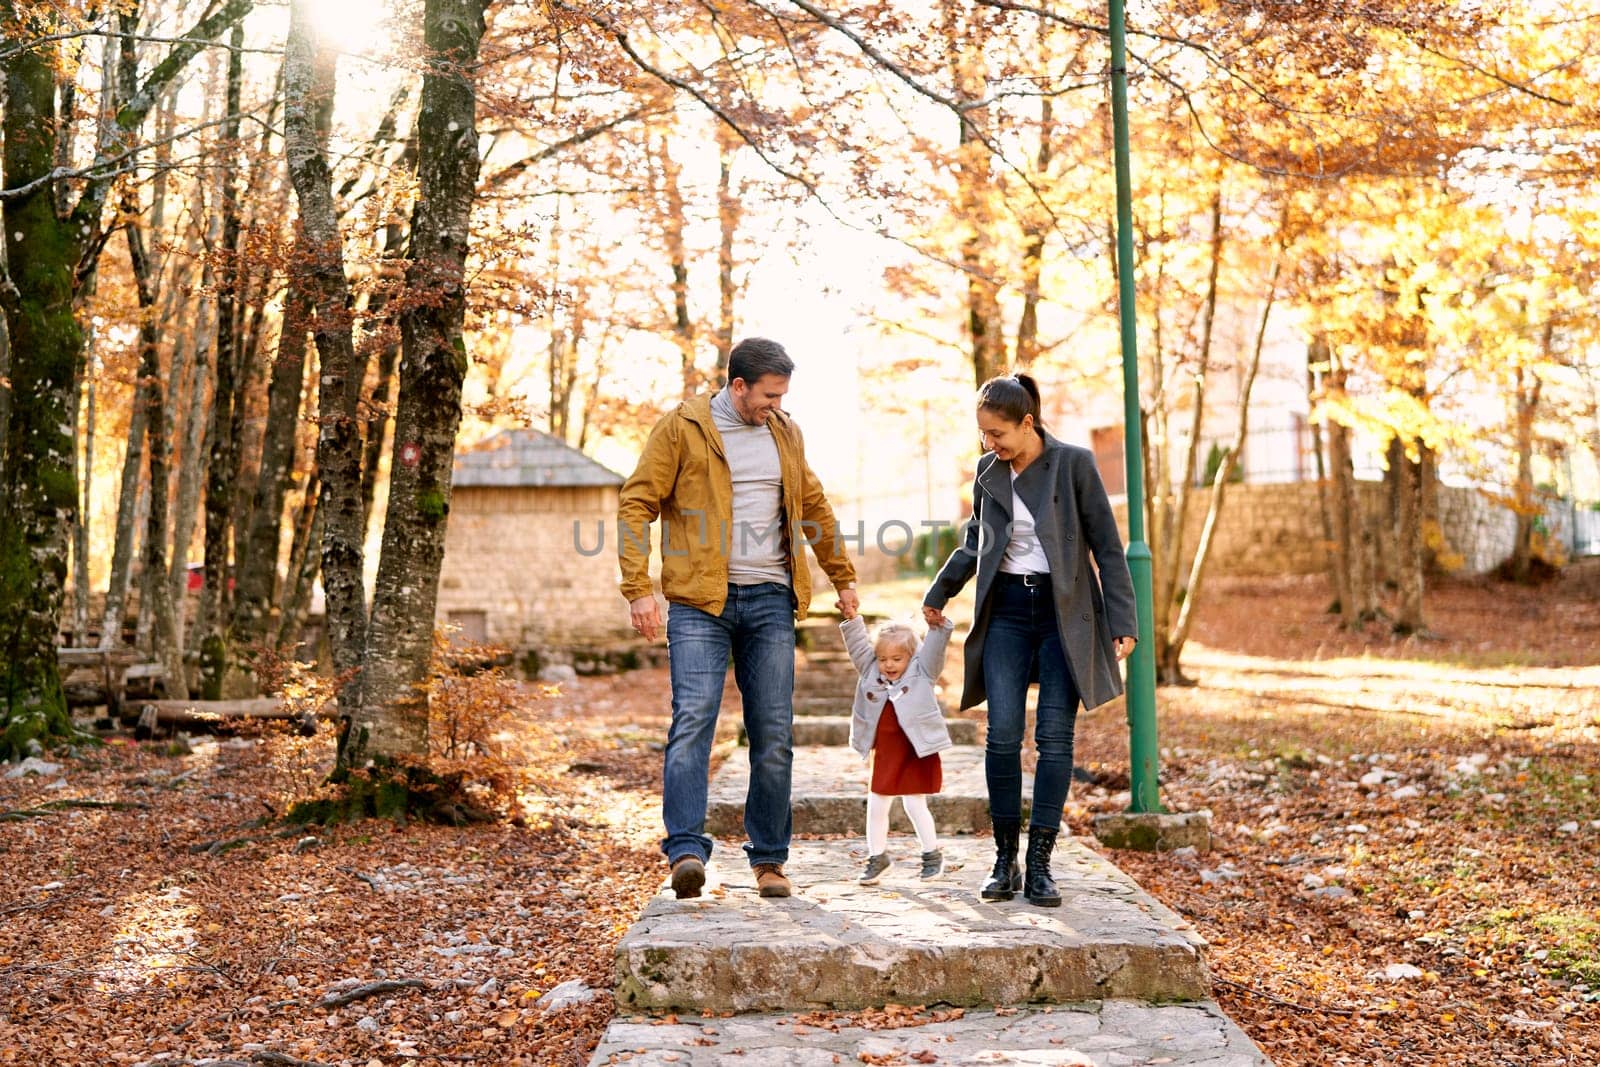 Parents lead their little daughter by the hands along a paved path in the autumn forest, lifting her above the steps. High quality photo